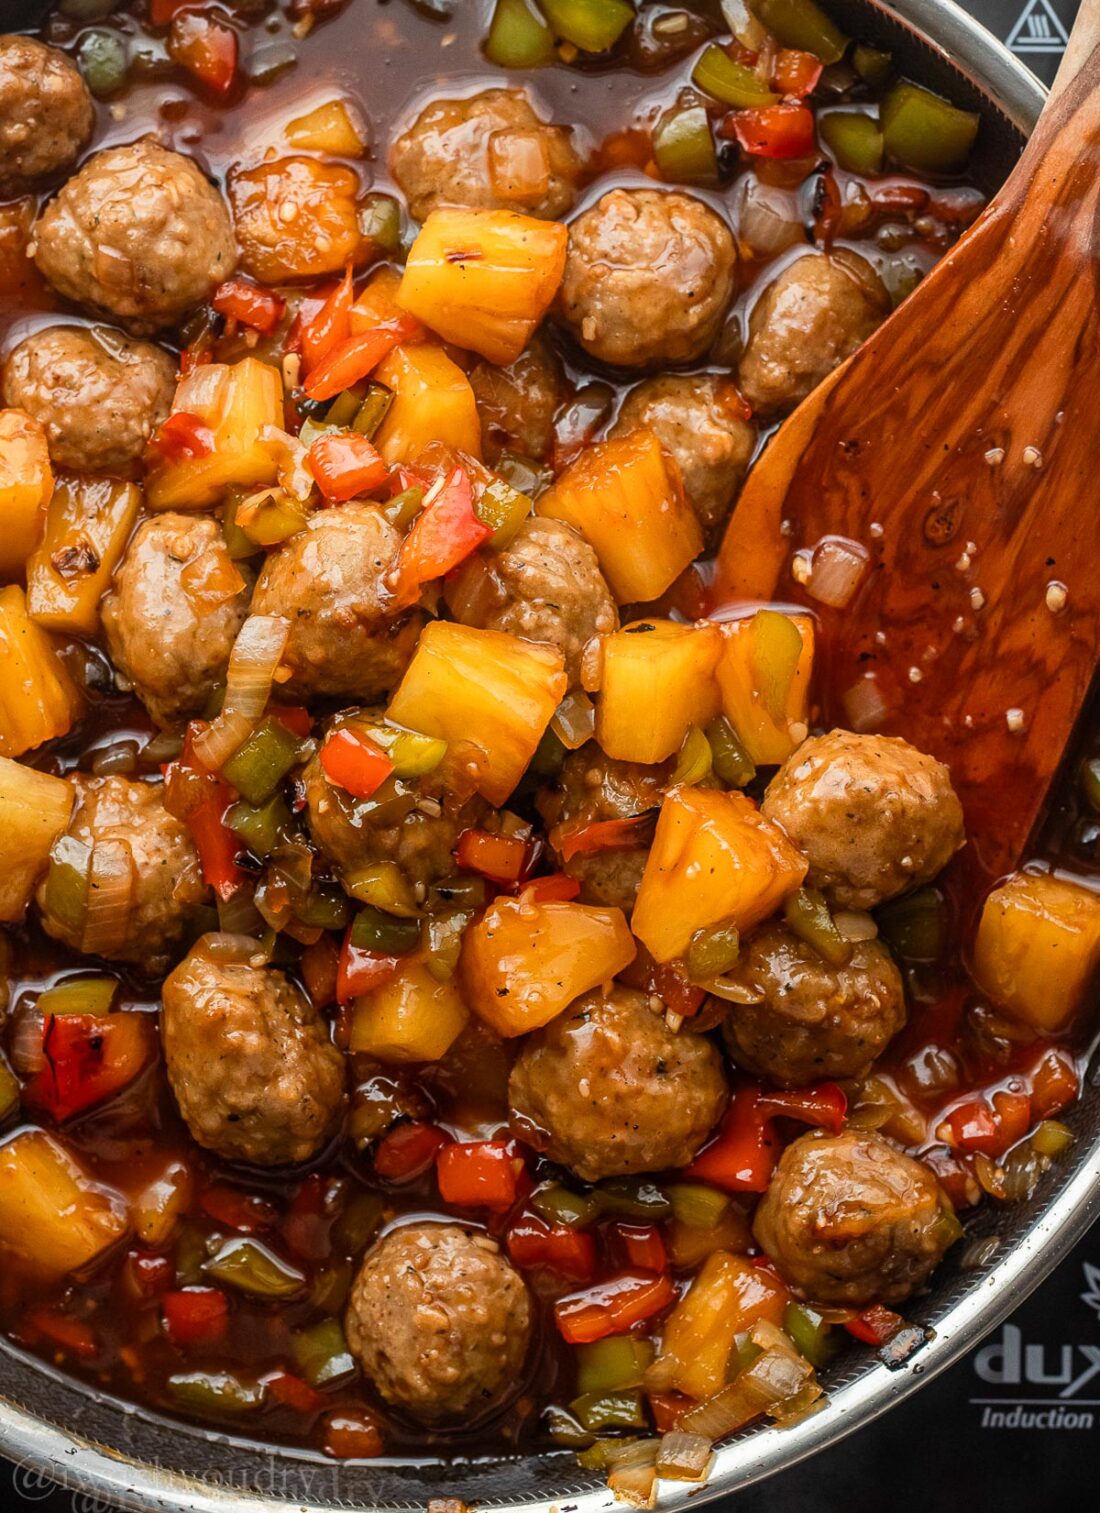 sweet and sour meatballs in sauce with pineapples and peppers.